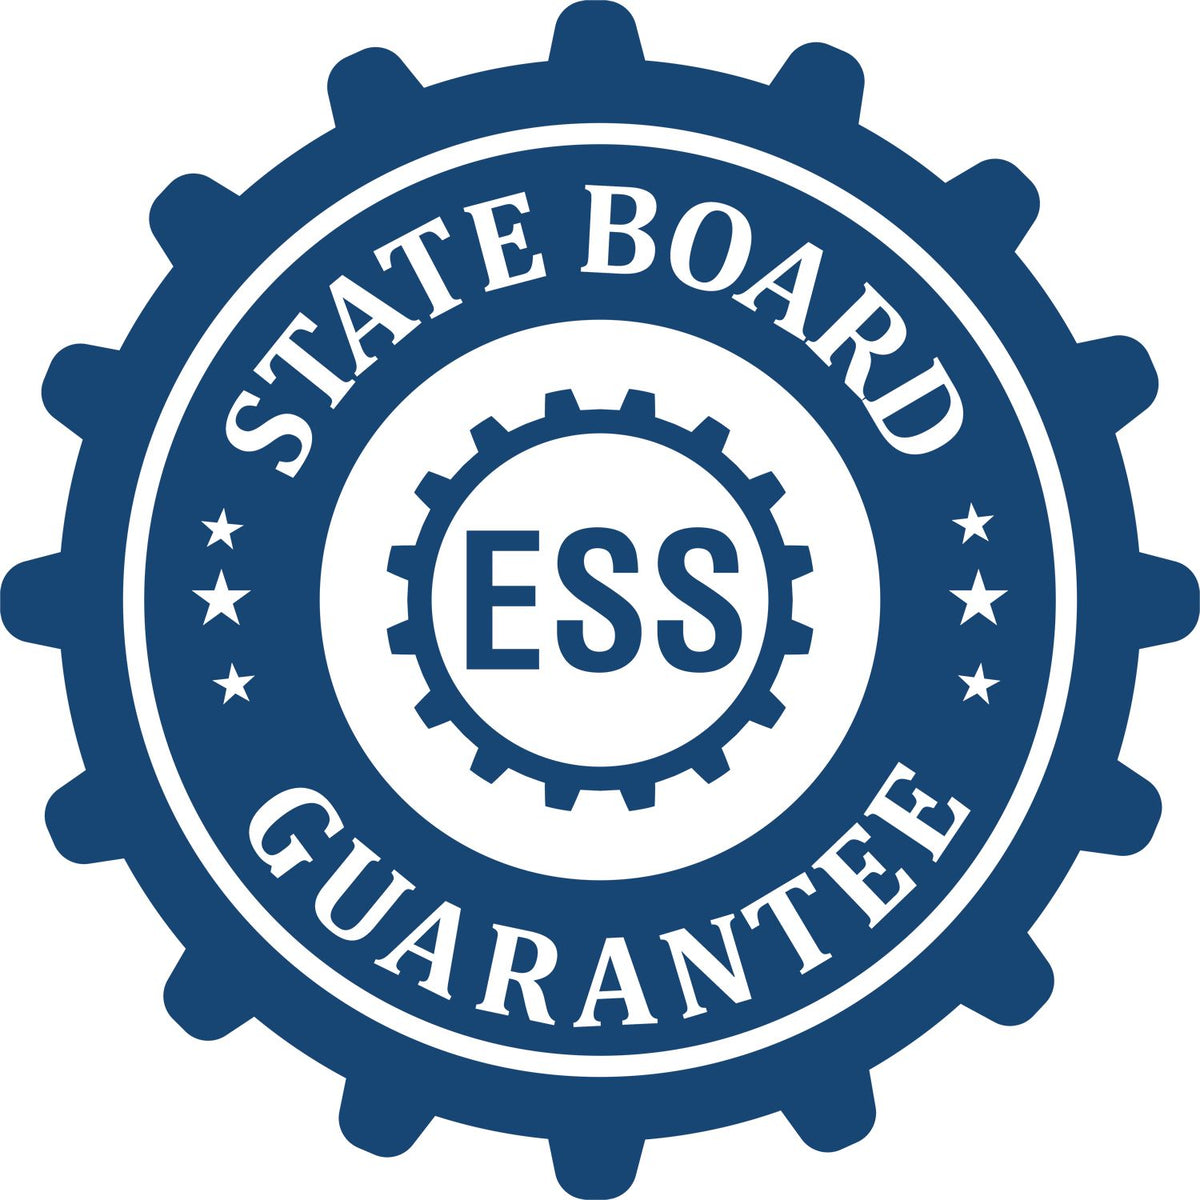 An emblem in a gear shape illustrating a state board guarantee for the Handheld Delaware Land Surveyor Seal product.